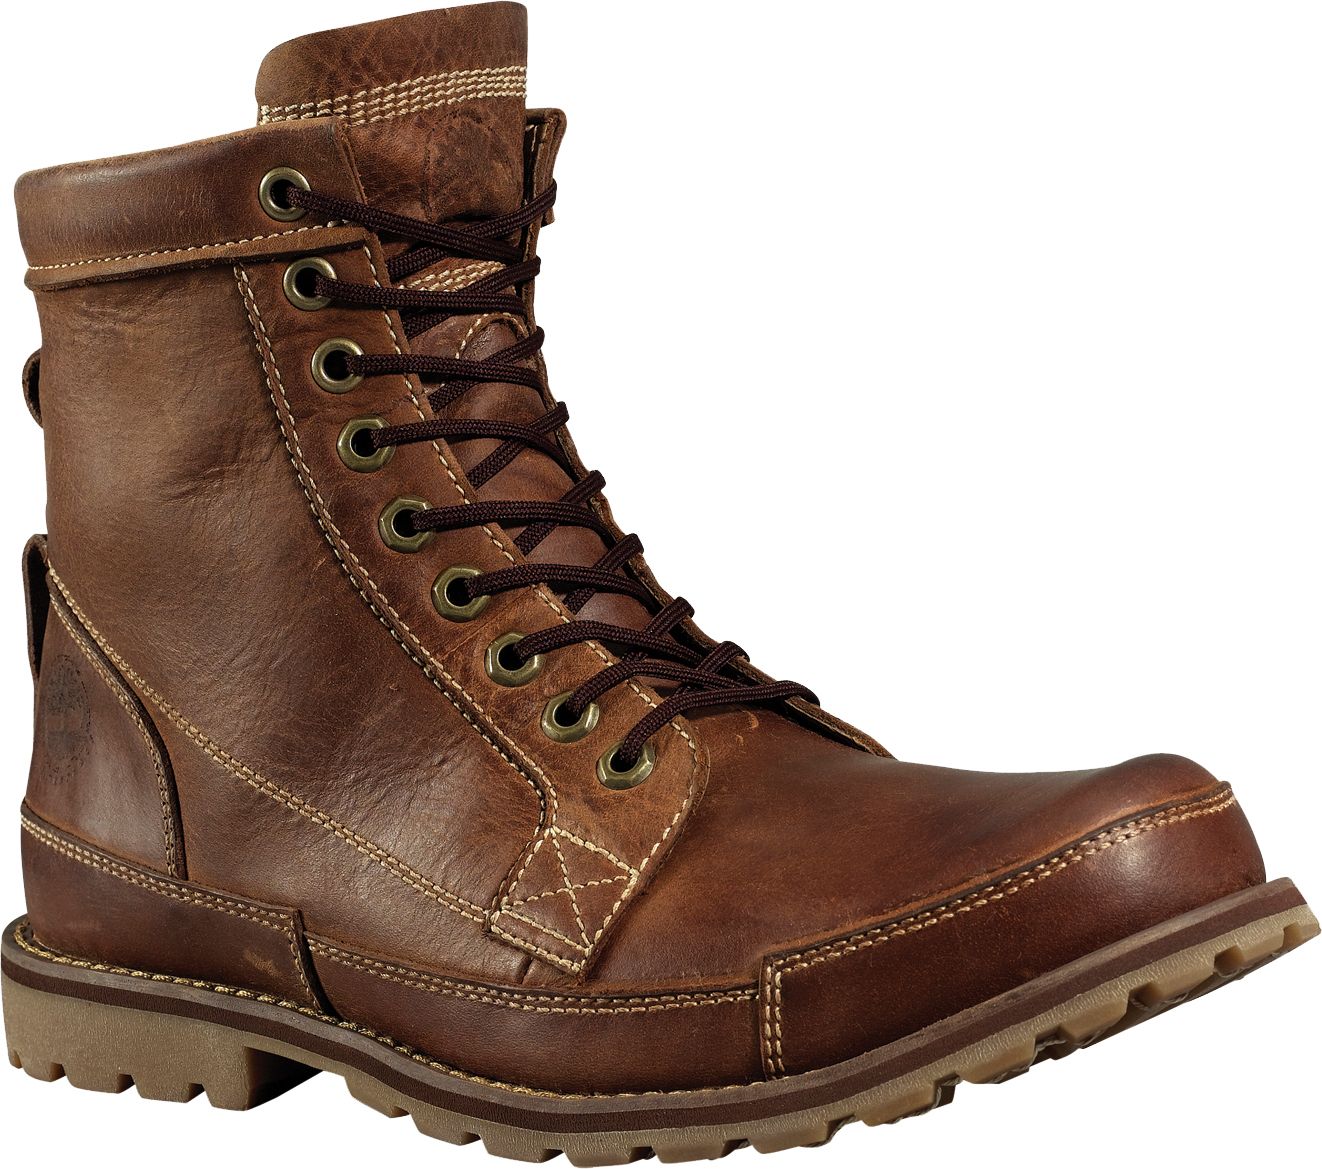 Earthkeepers Original 6'' Boots 